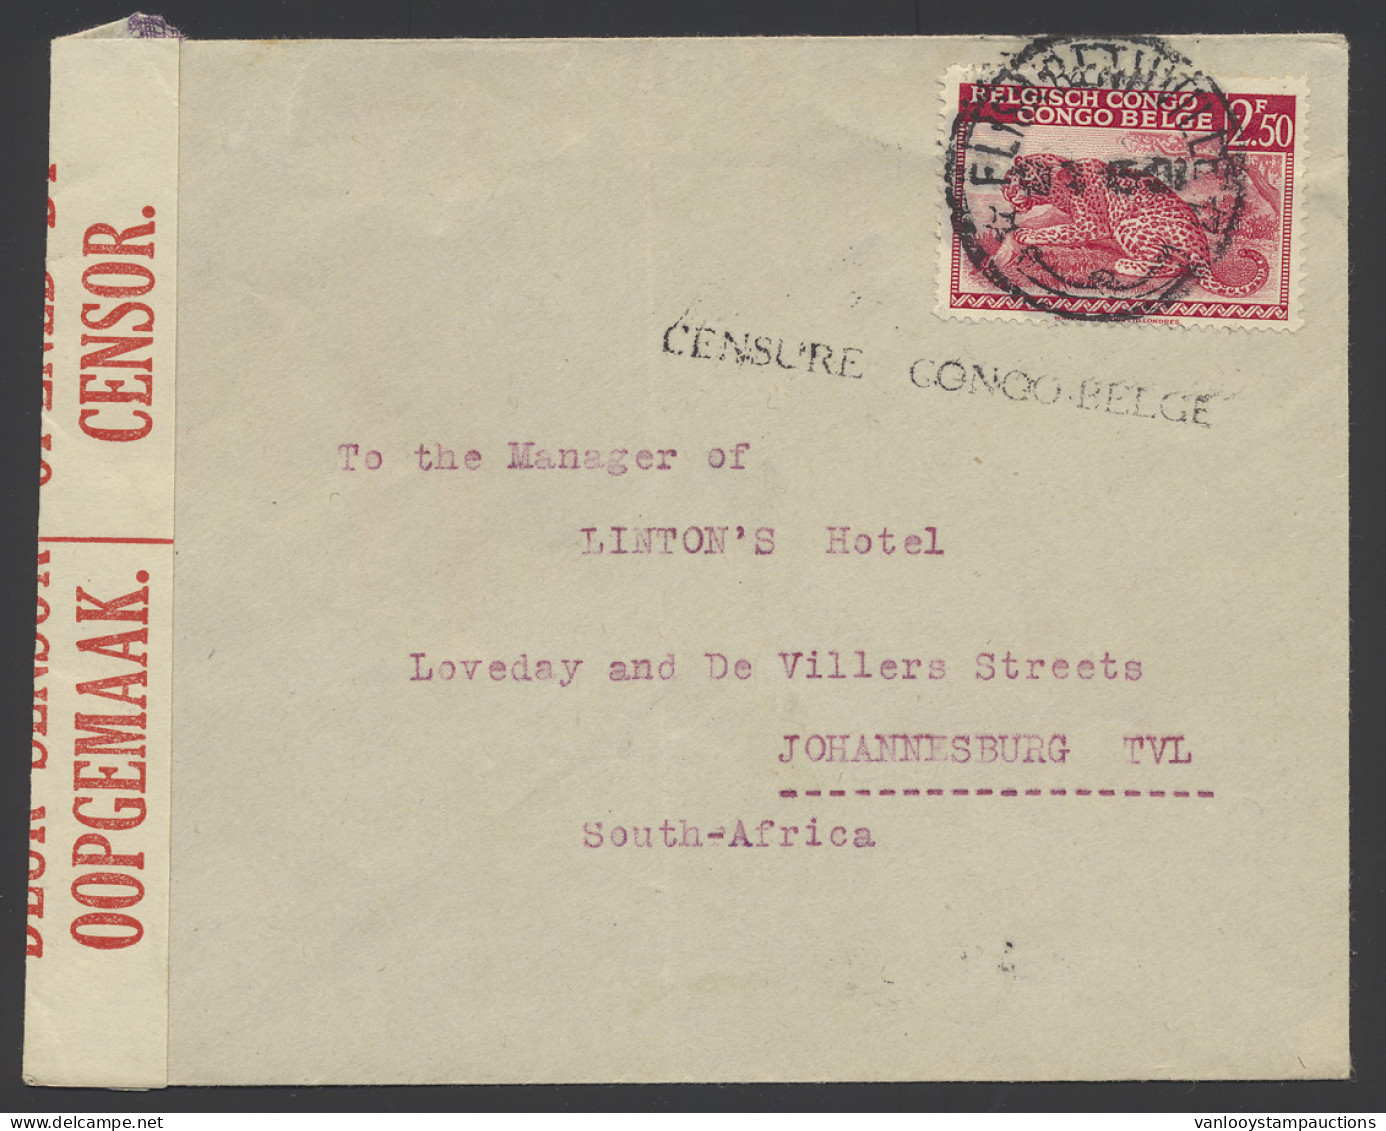 1945 Cover Franked With OBP N° 241 Sent From Elisabethville To Johannesburg/South Africa, Linear Censor Mark CENSURE CON - Covers & Documents